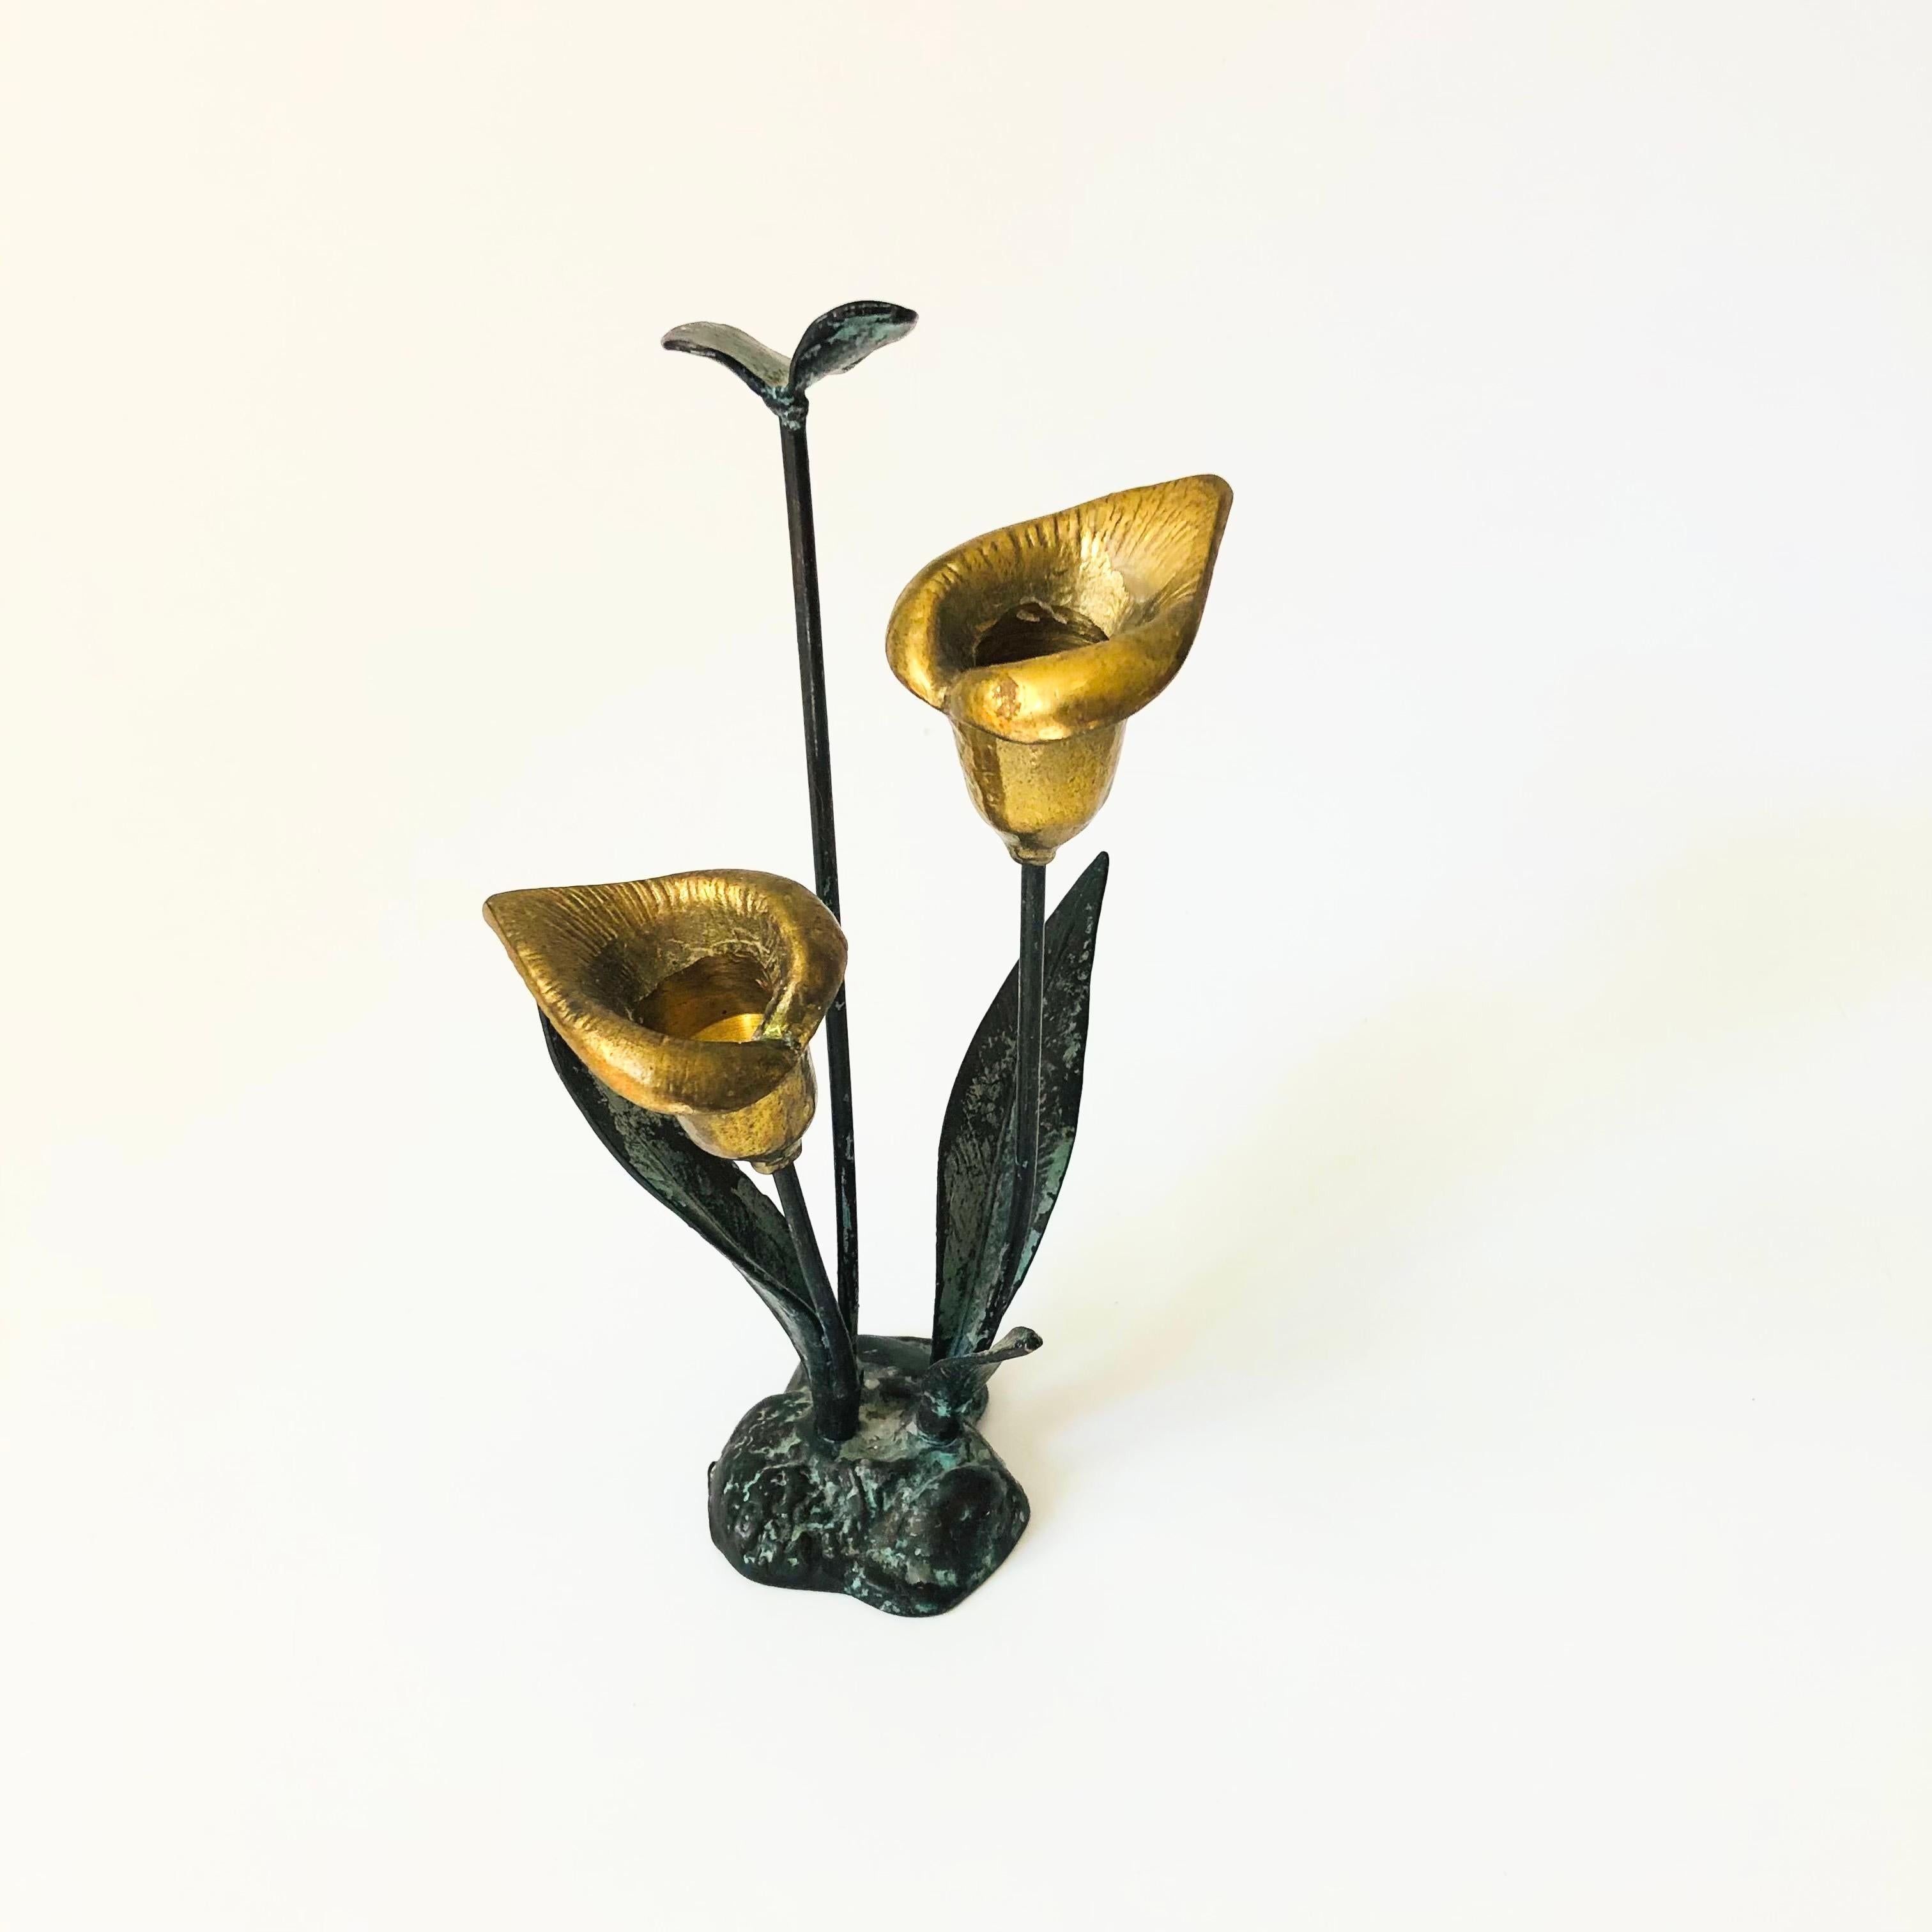 A vintage metal calla lily candle holder. The leaves and stem have been given a wonderful vertigris patina while the lily flowers have been left bright gold. 2 candles can be placed in the brass calla lilies.

